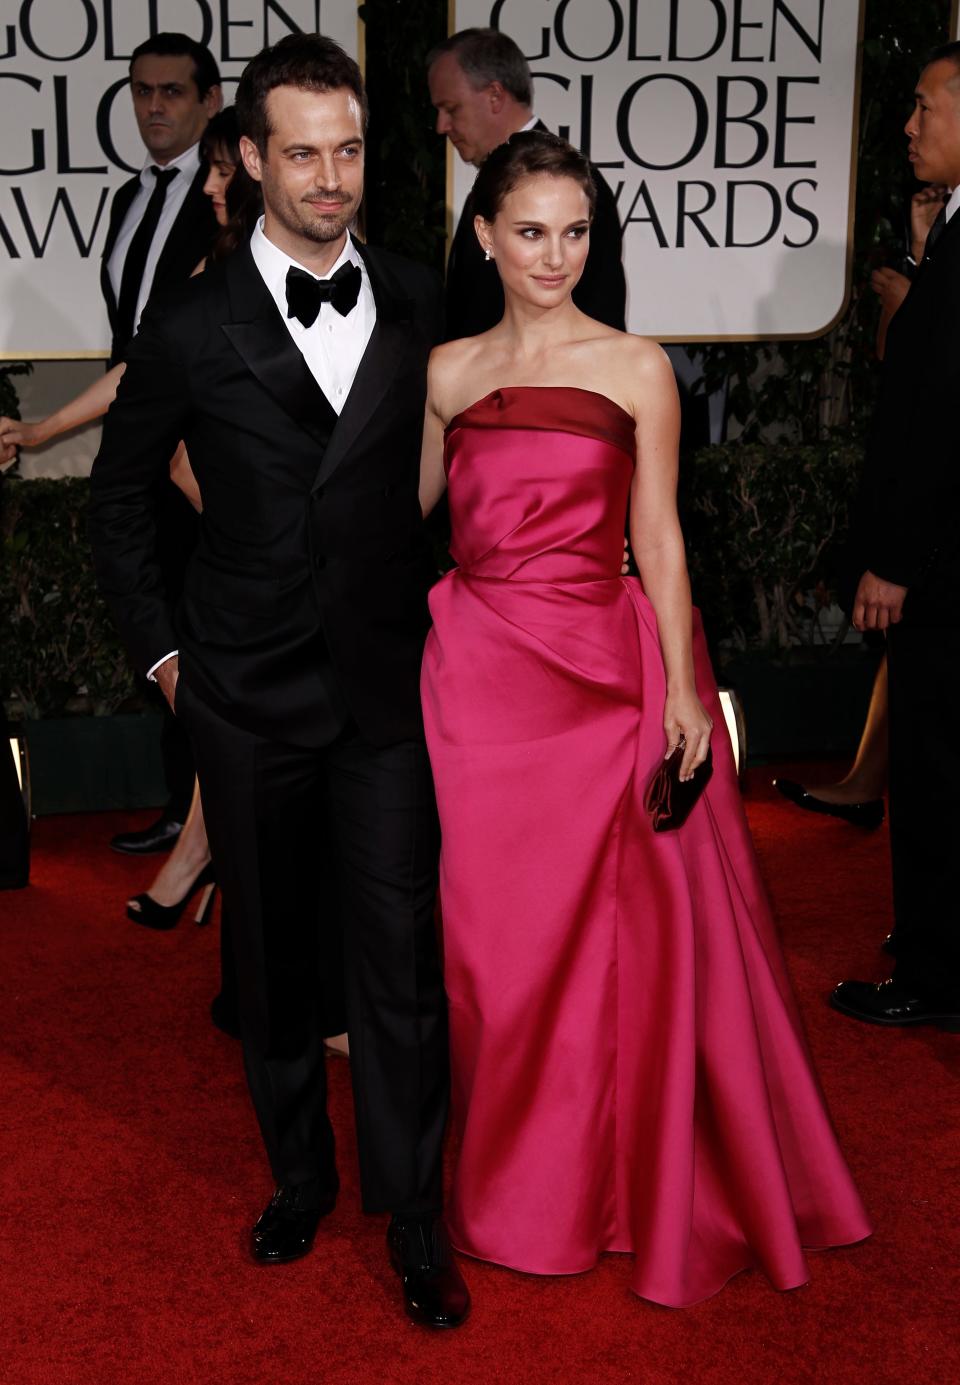 Natalie Portman filed for divorce from her husband Benjamin Millepied months ago, a rep confirmed to USA TODAY. The former couple share two children.